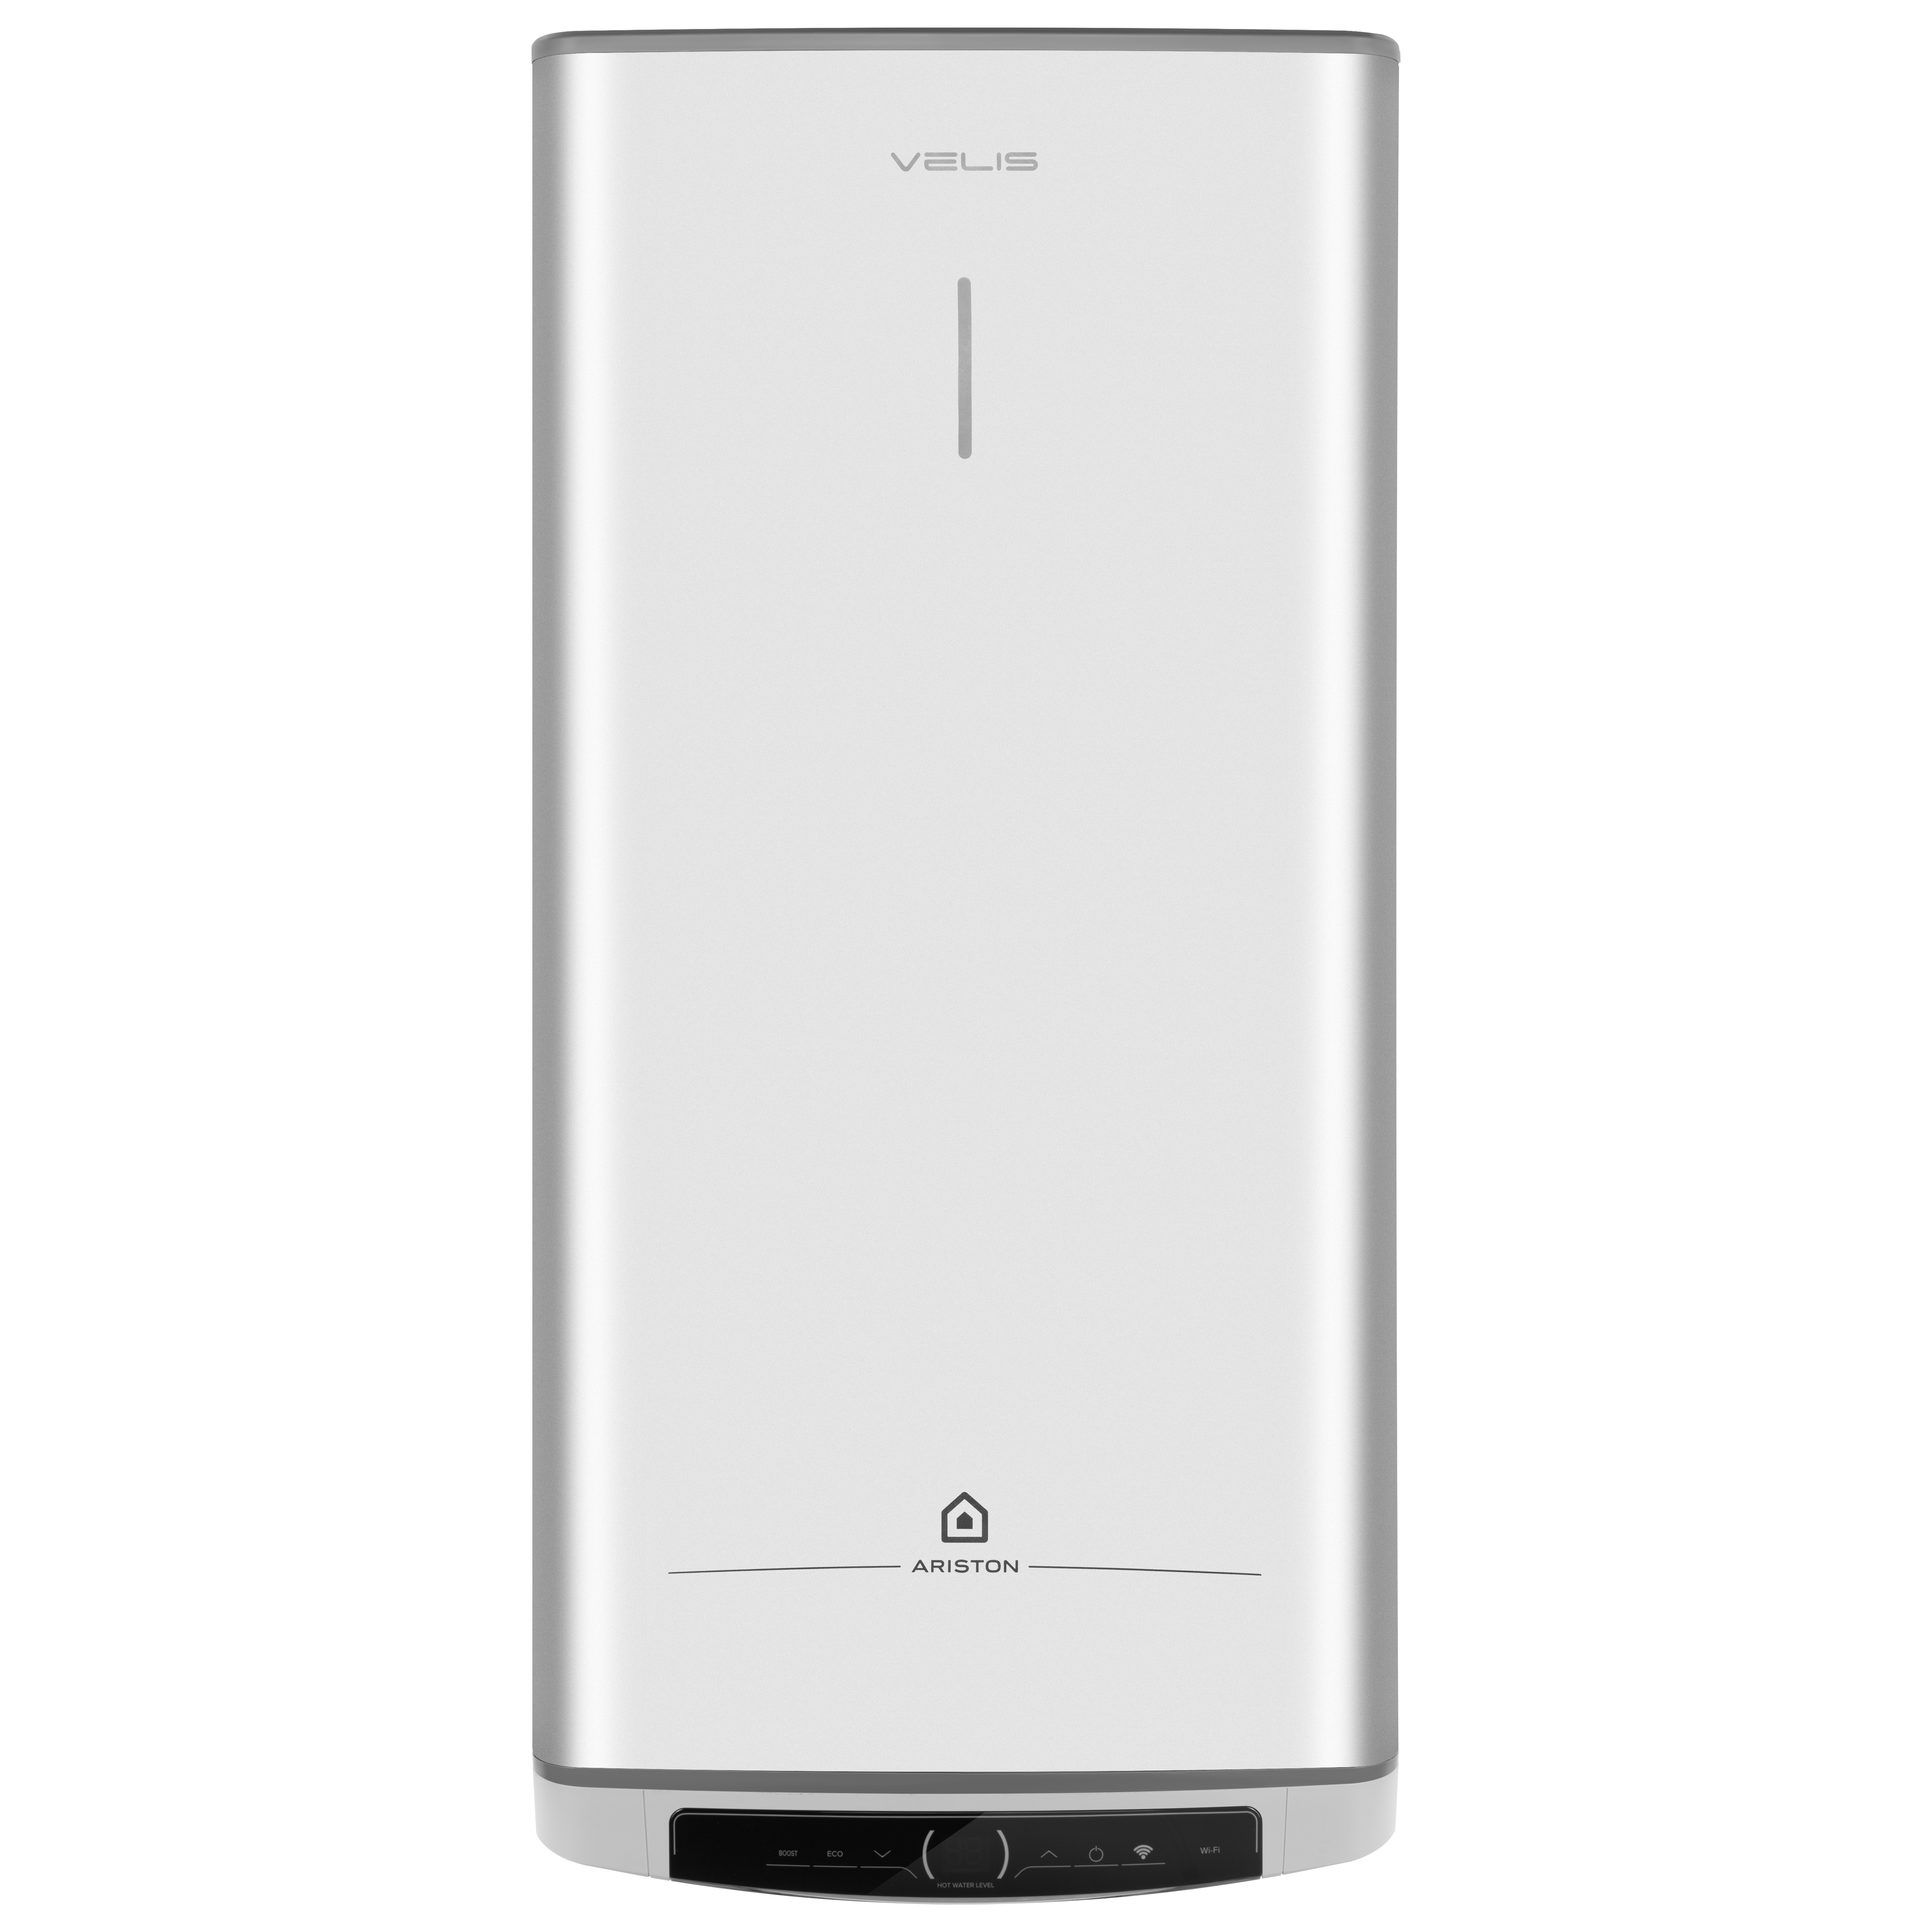 Бойлер с Wi-Fi Ariston VELIS LUX PW ABSE DRY WIFI 80 3700716